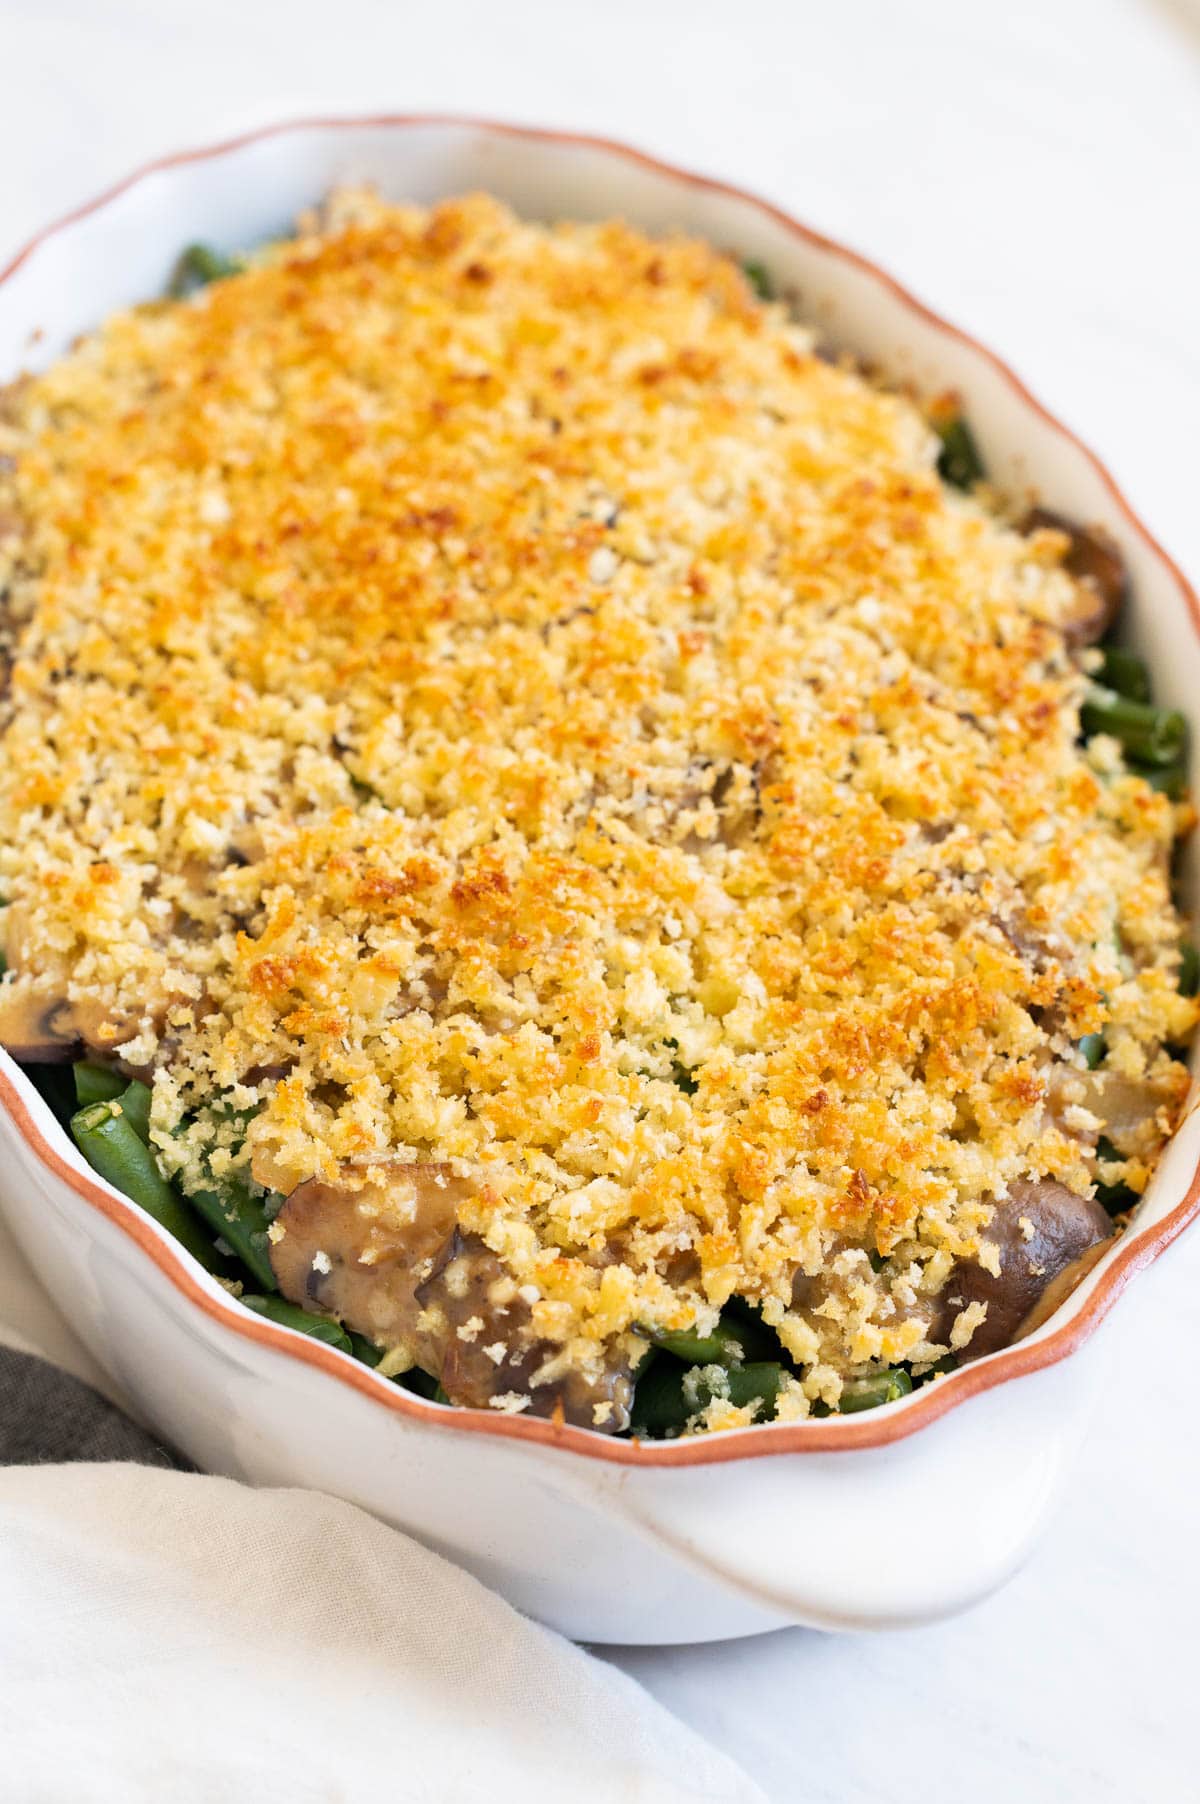 Healthy green bean casserole with parmesan breadcrumb topping in white dish.